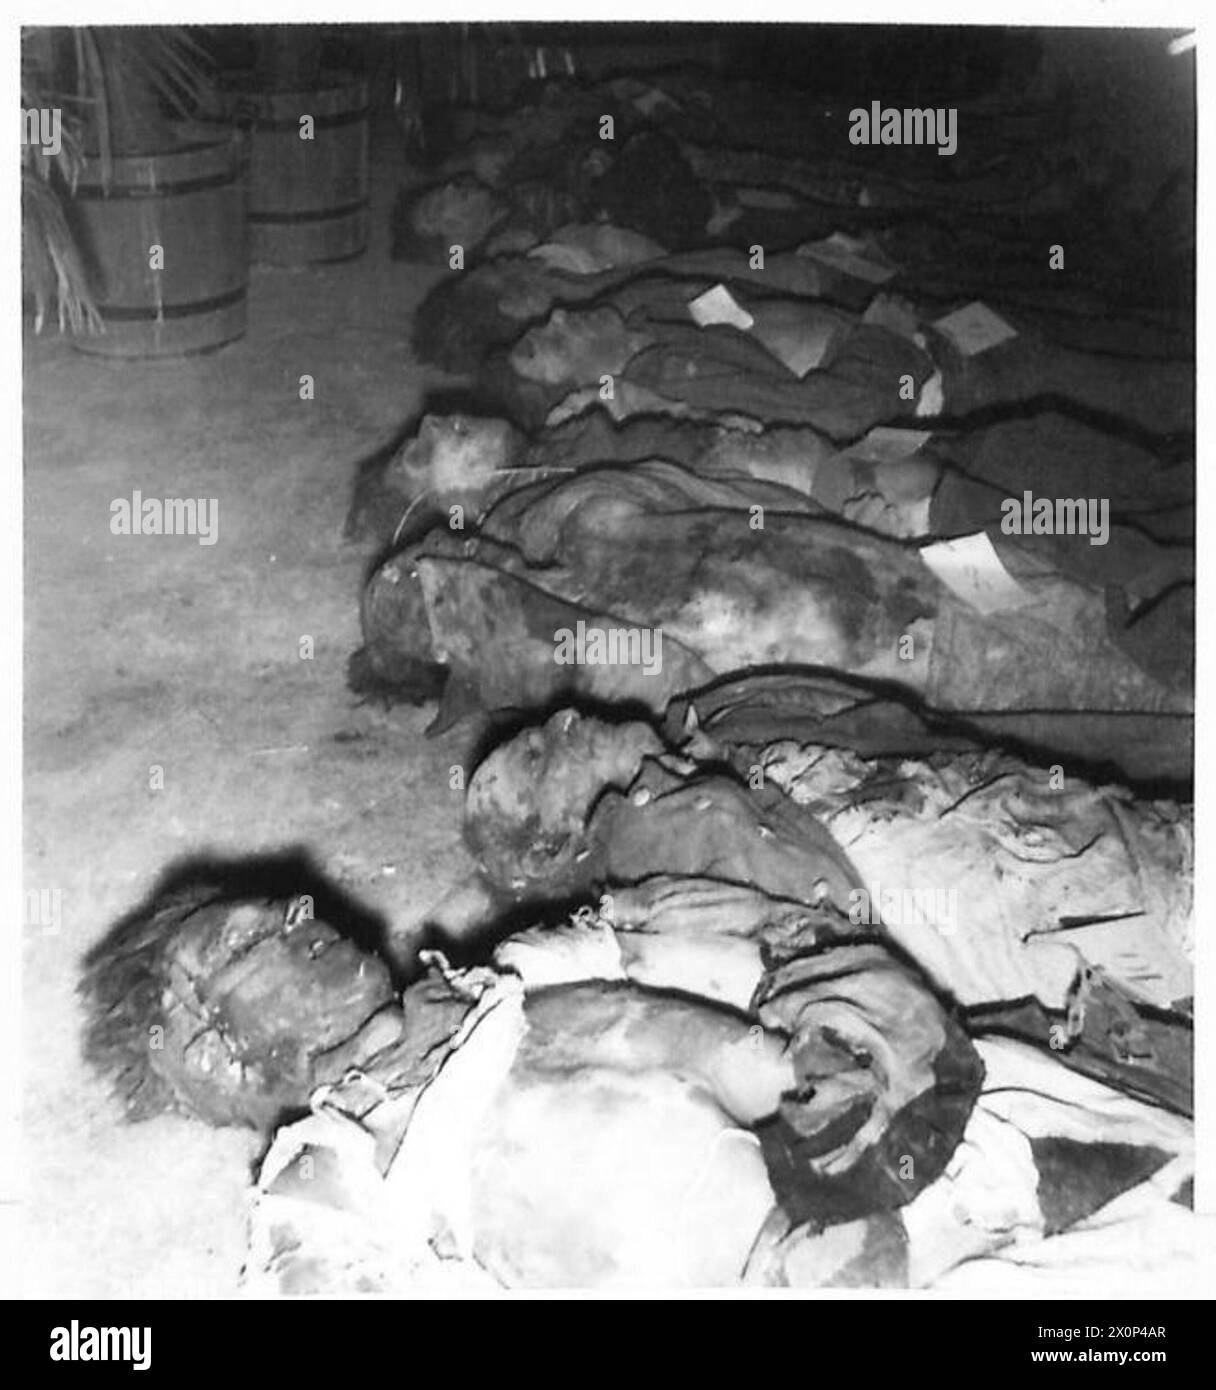 YUGOSLAVIA : ANOTHER ATROCITY UNCOVERED - Men of all ages murdered by the collaborators. Photographic negative , British Army Stock Photo